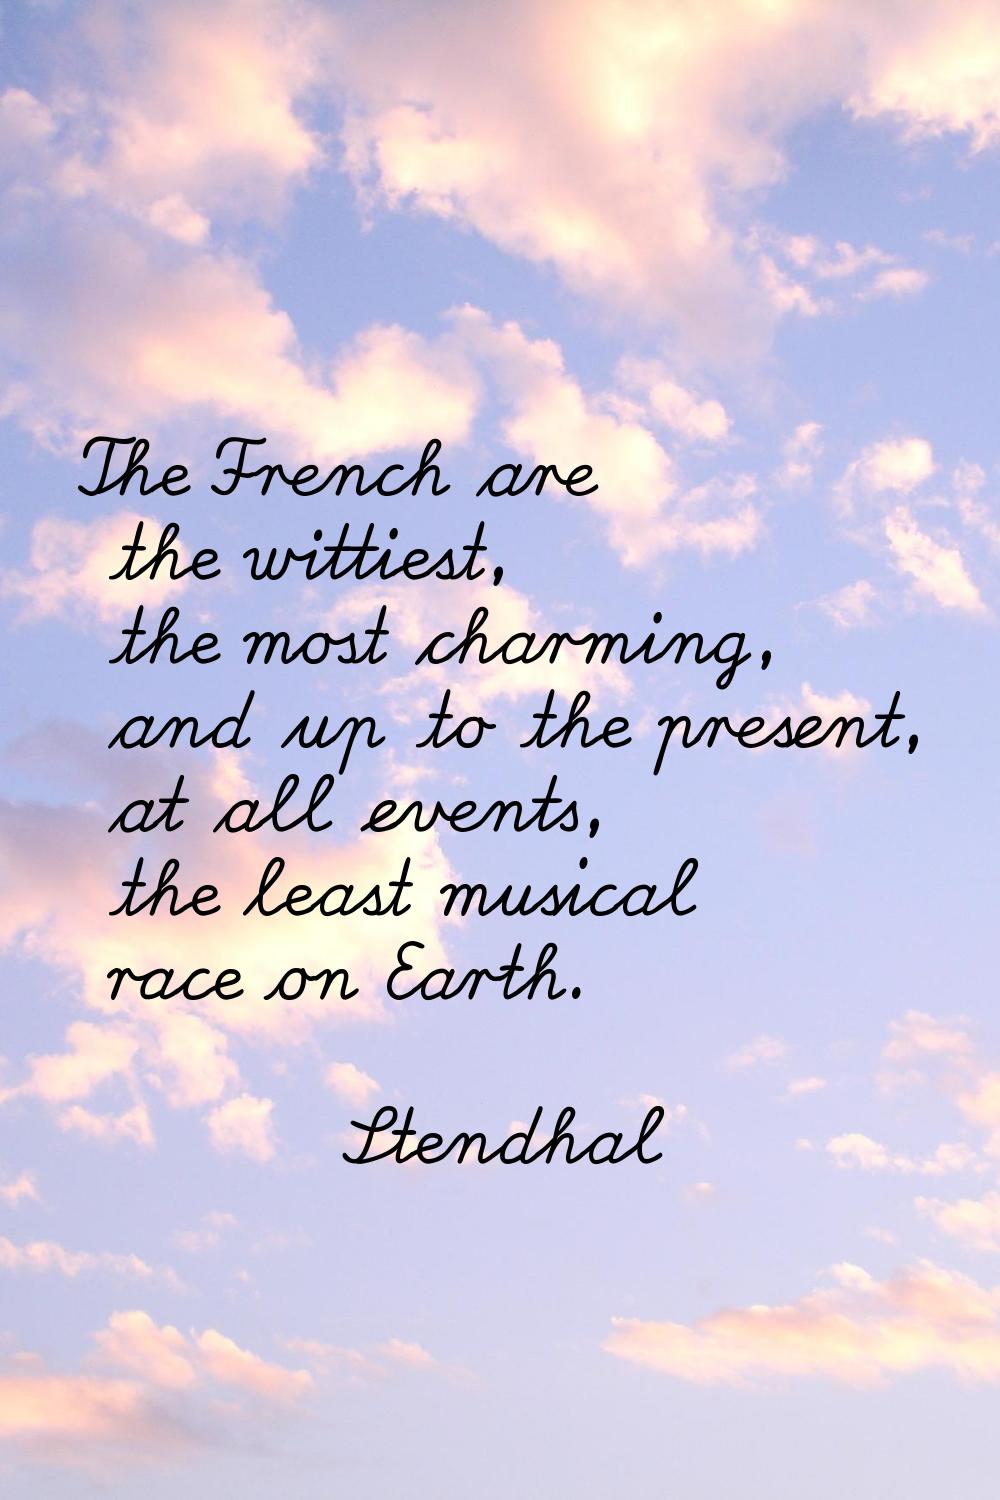 The French are the wittiest, the most charming, and up to the present, at all events, the least mus